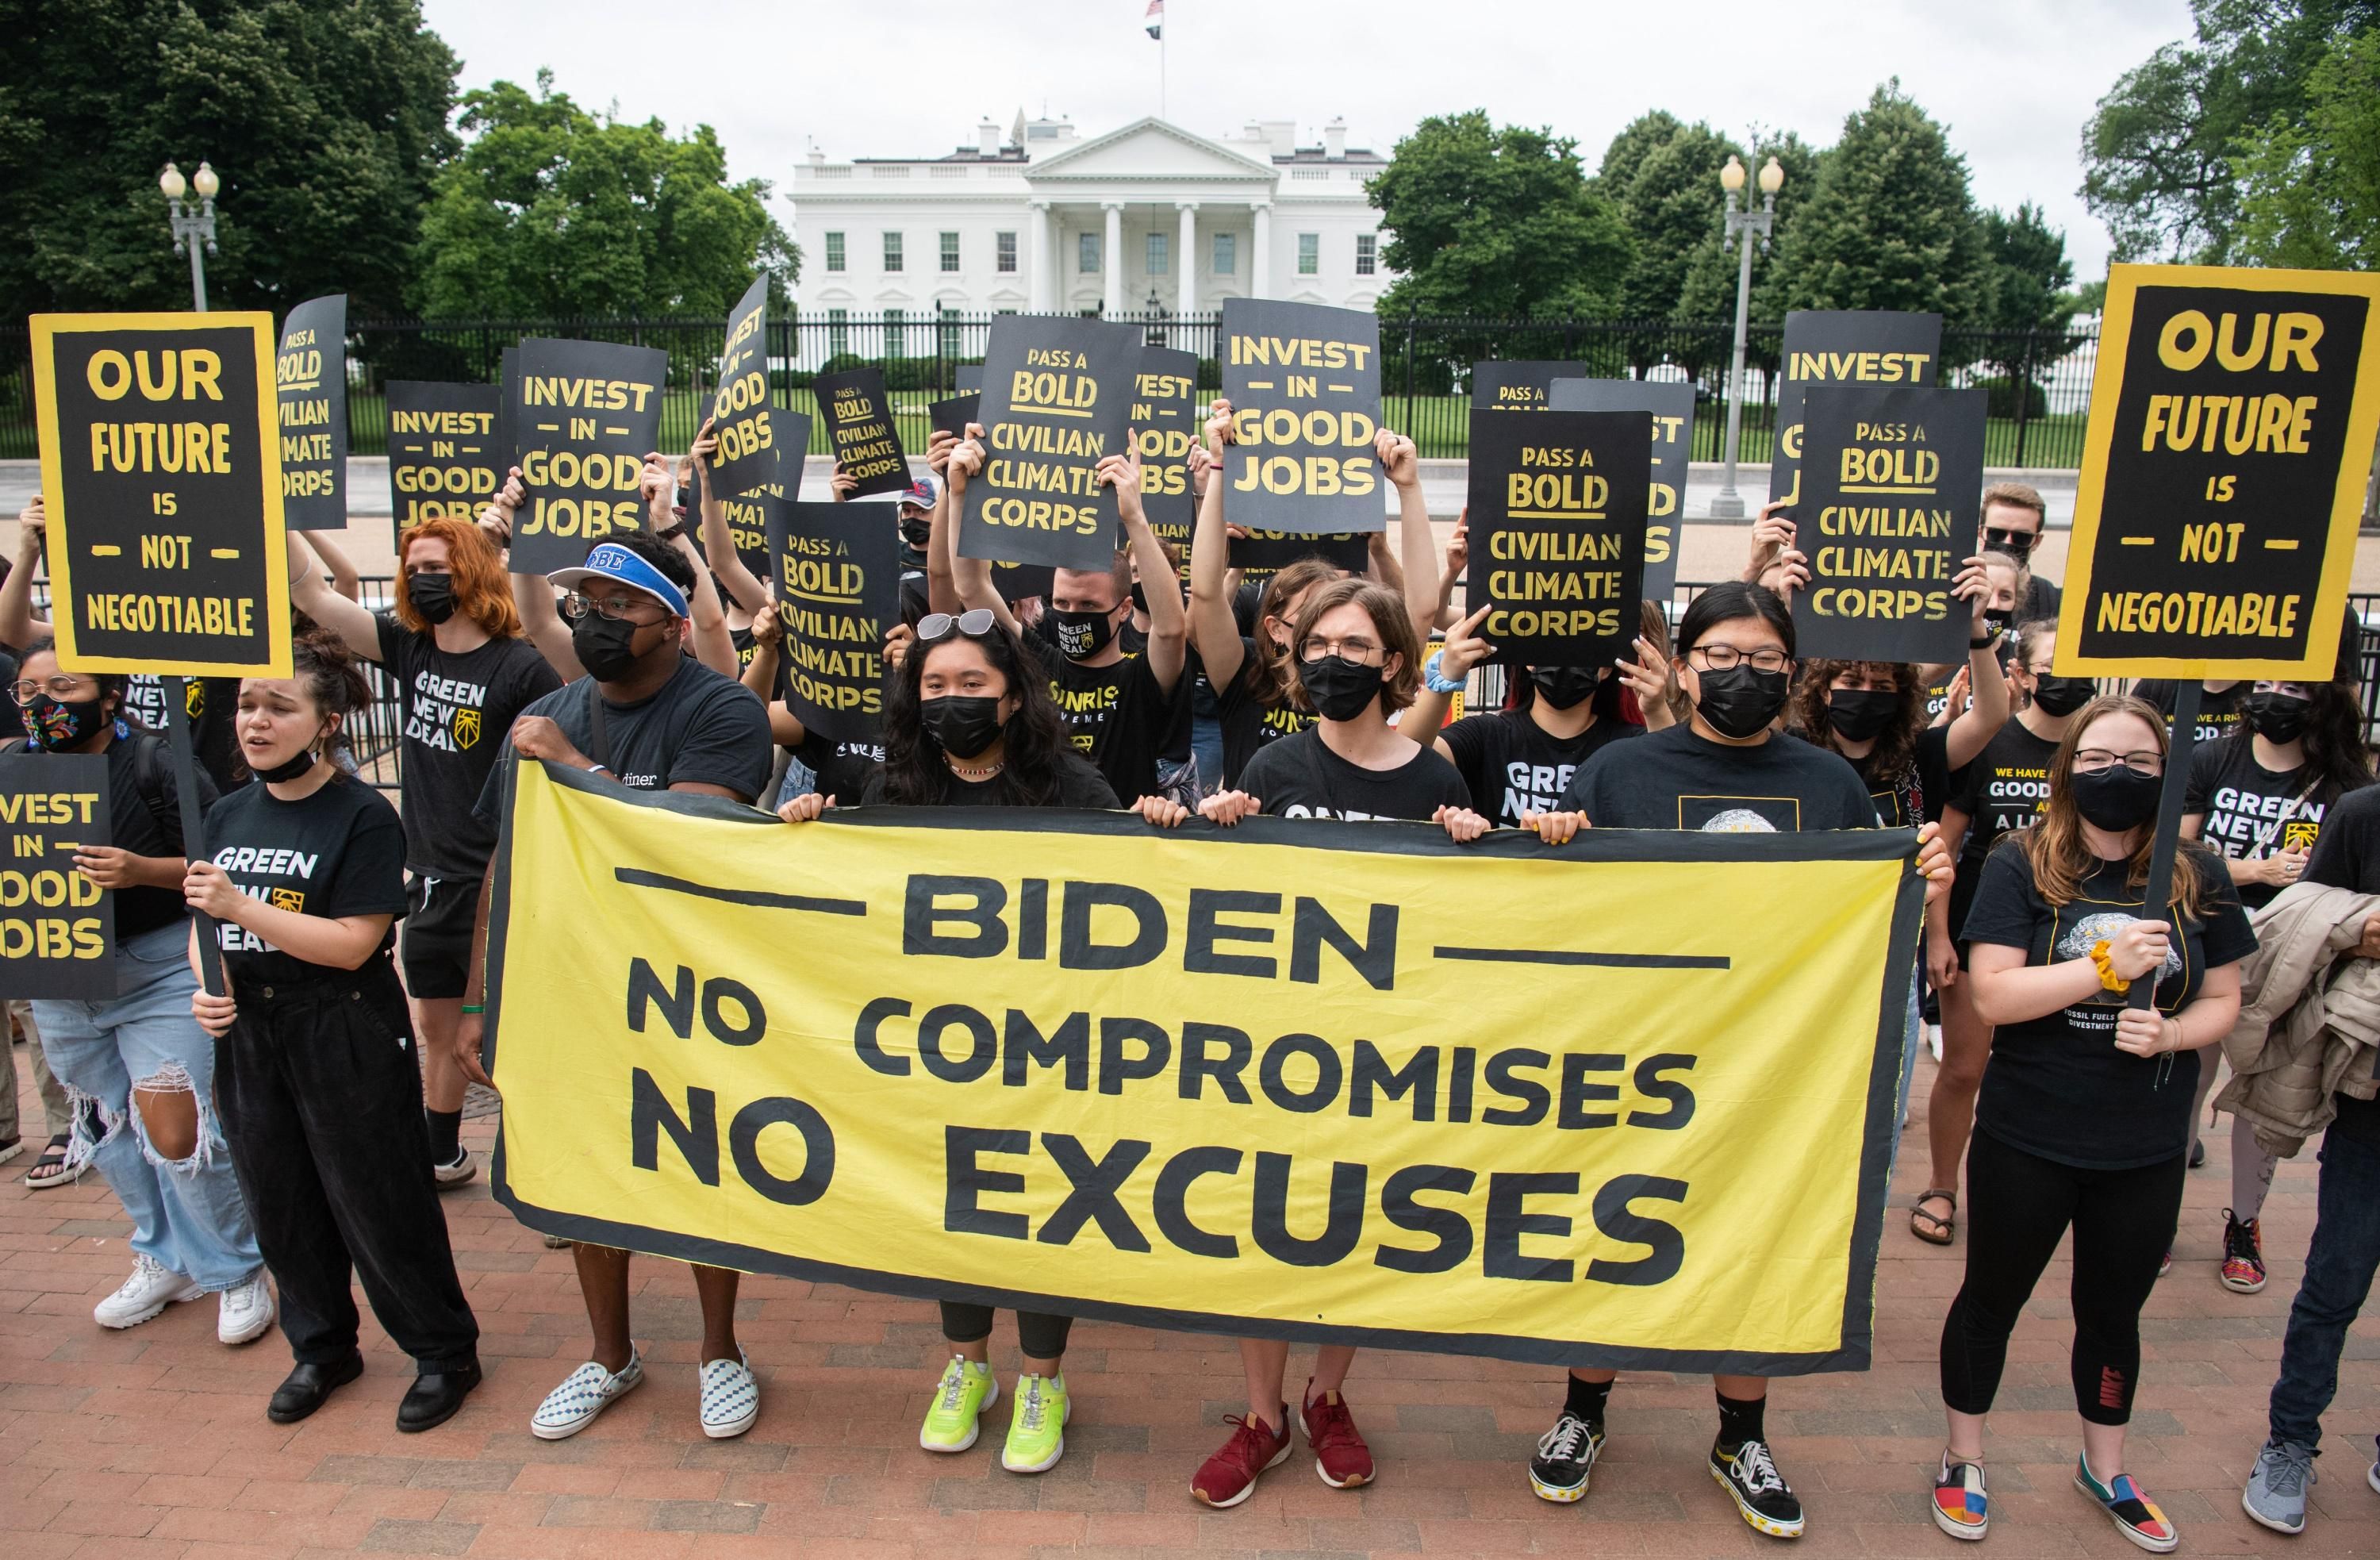 Activists with the Sunrise Movement protest in front of the White House